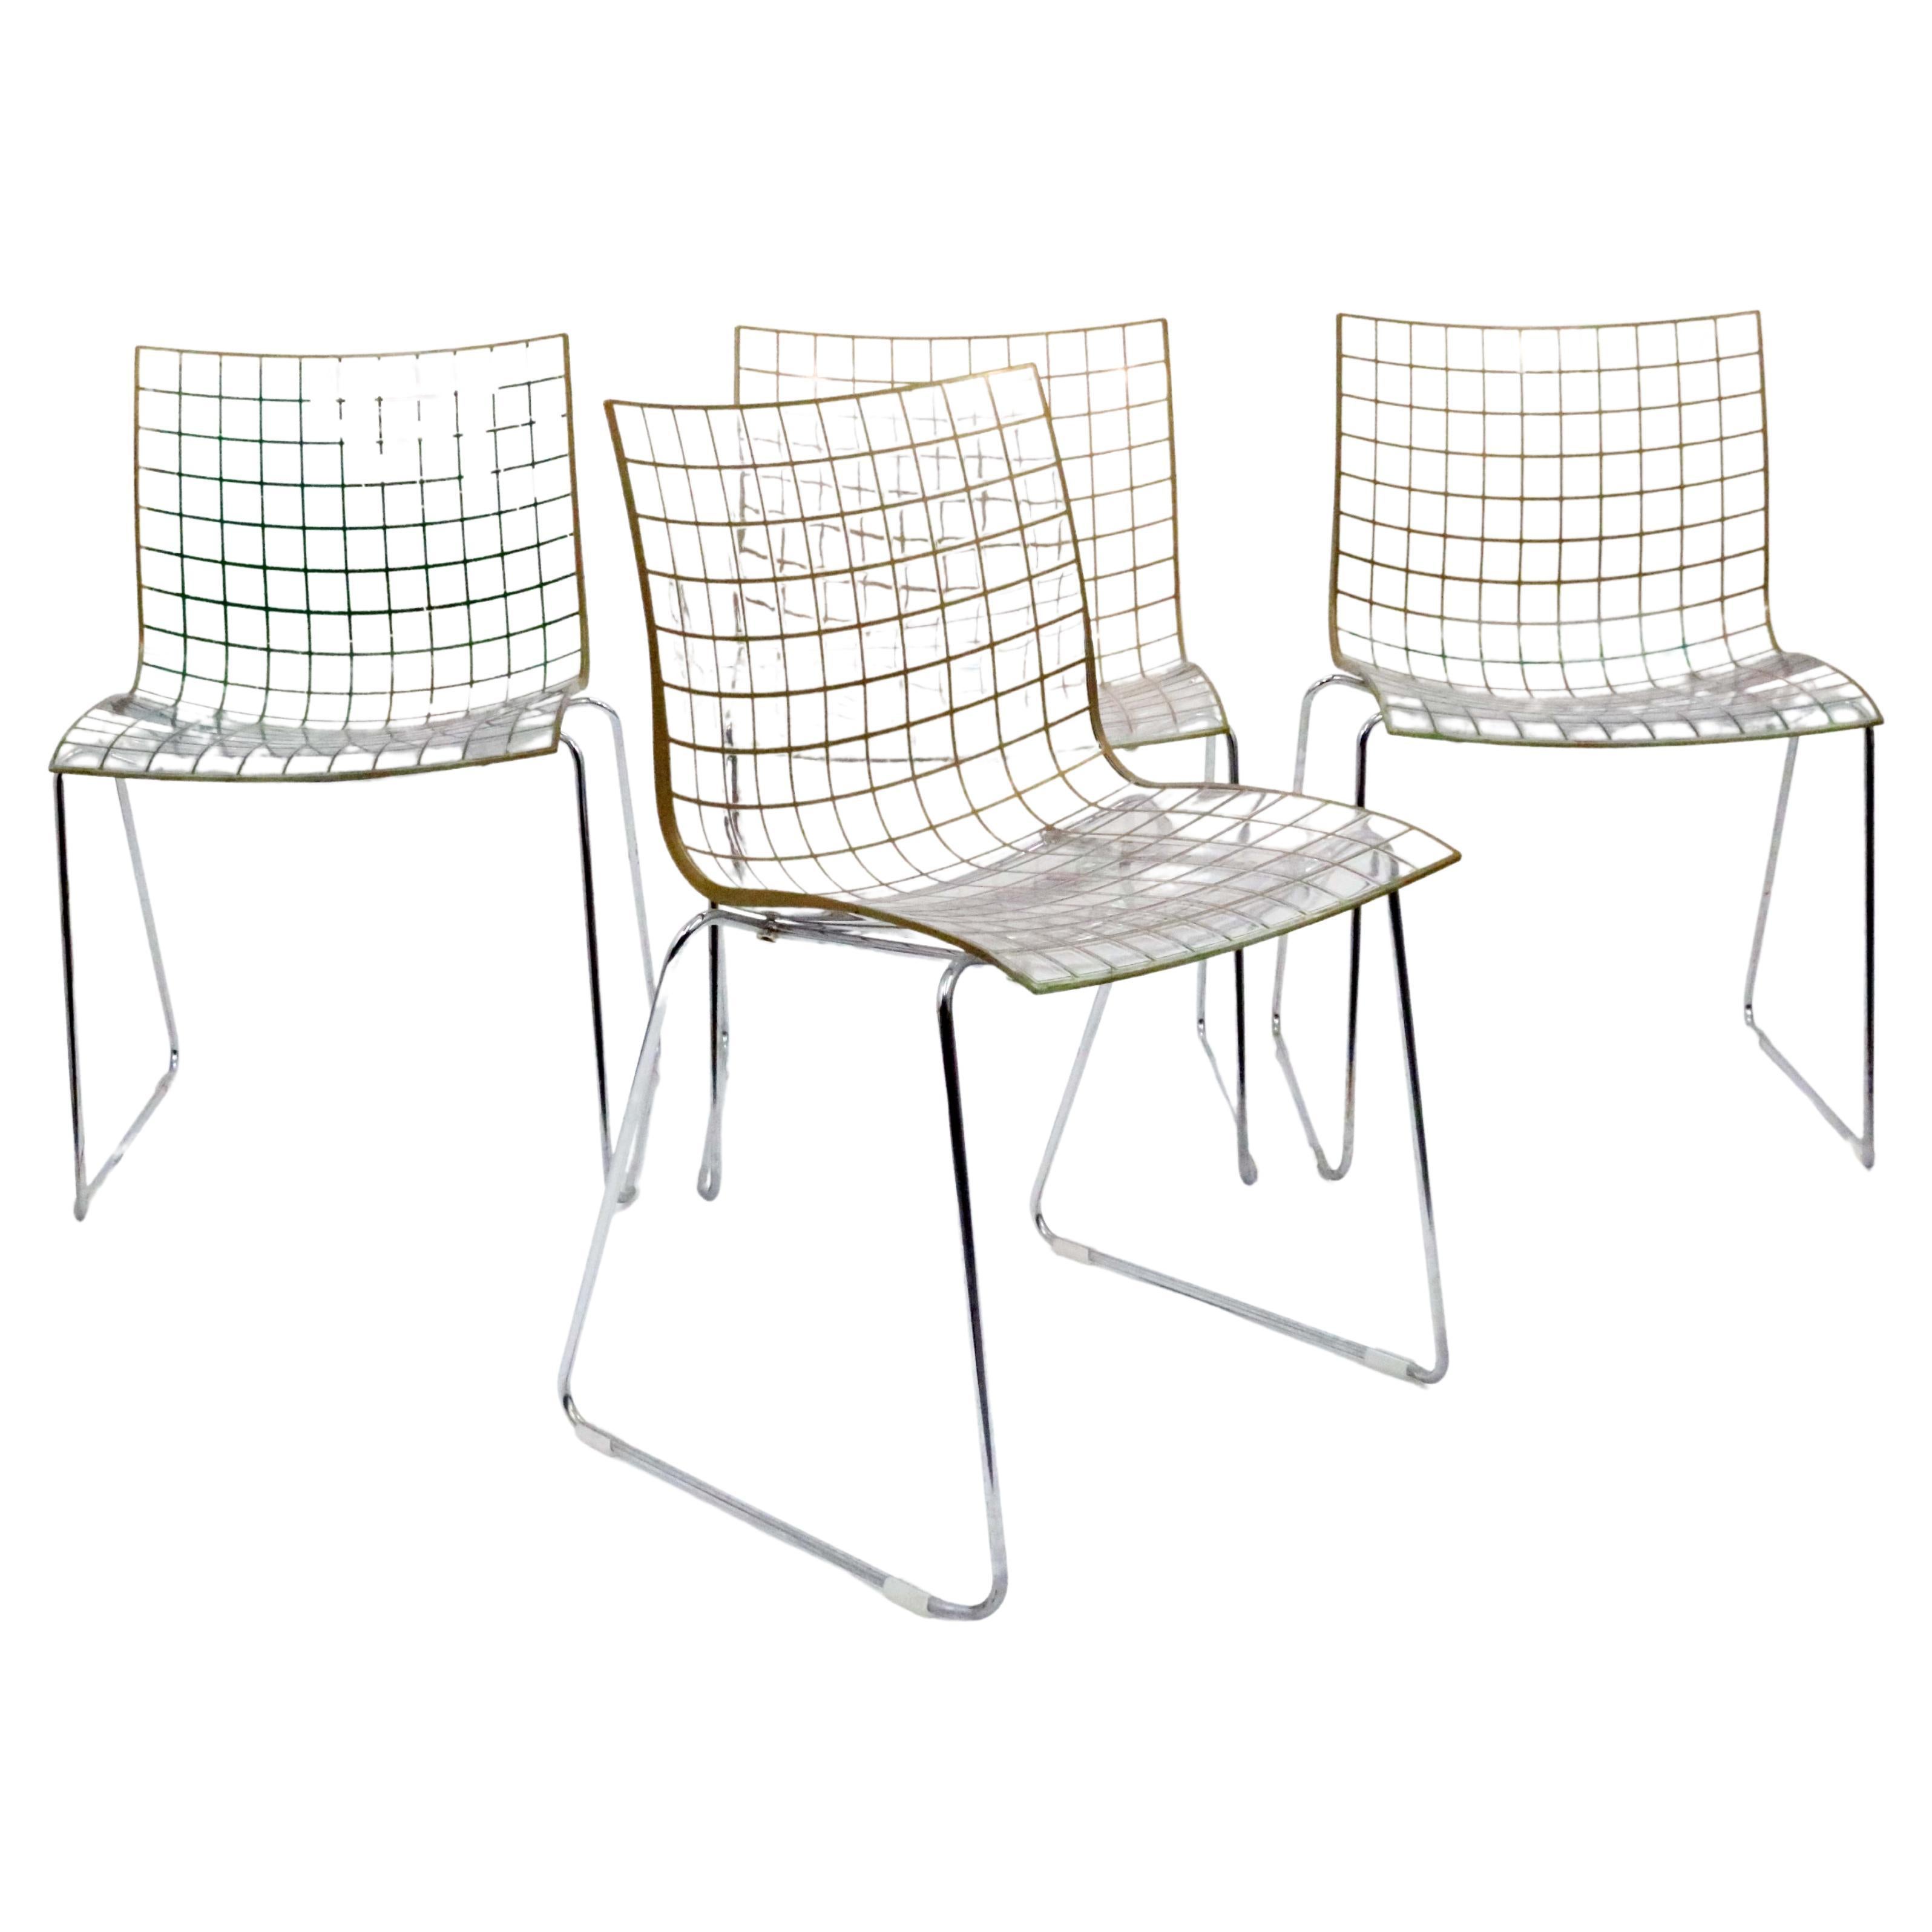 Marco Maran X3 Chairs for Knoll, Set of 4